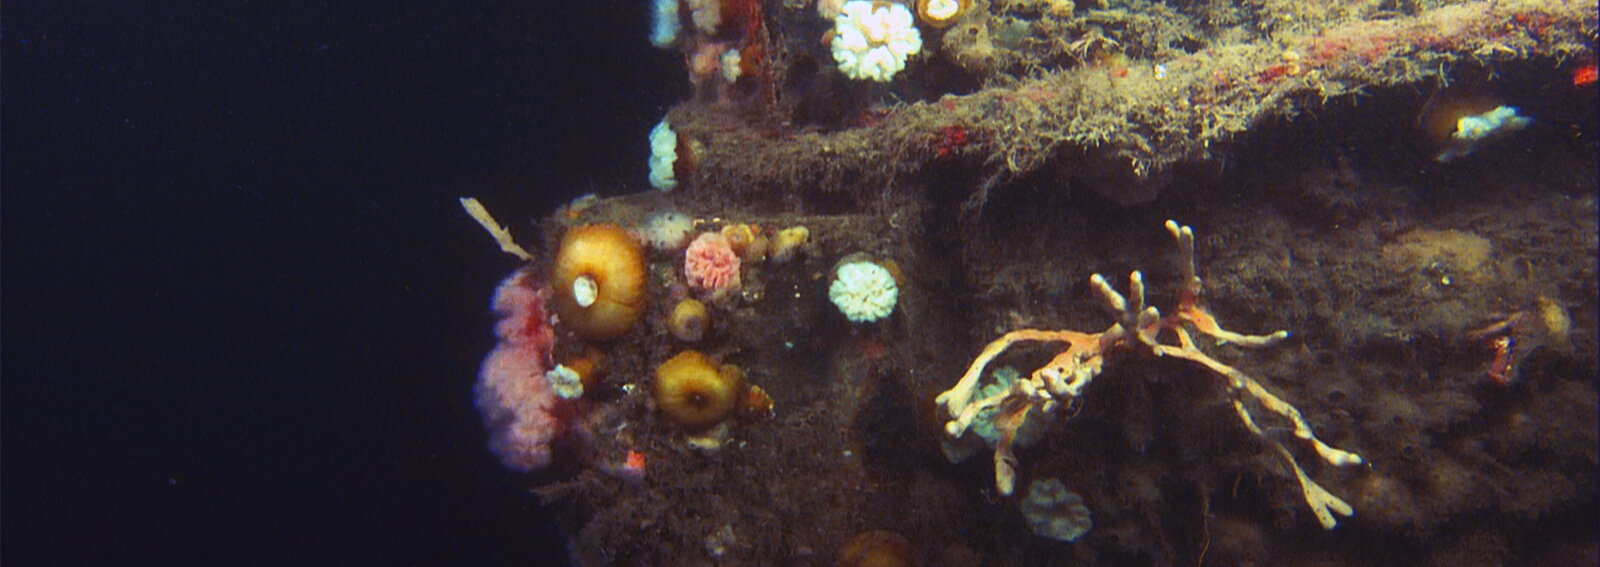 The bow of a shipwreck covered in marine growth